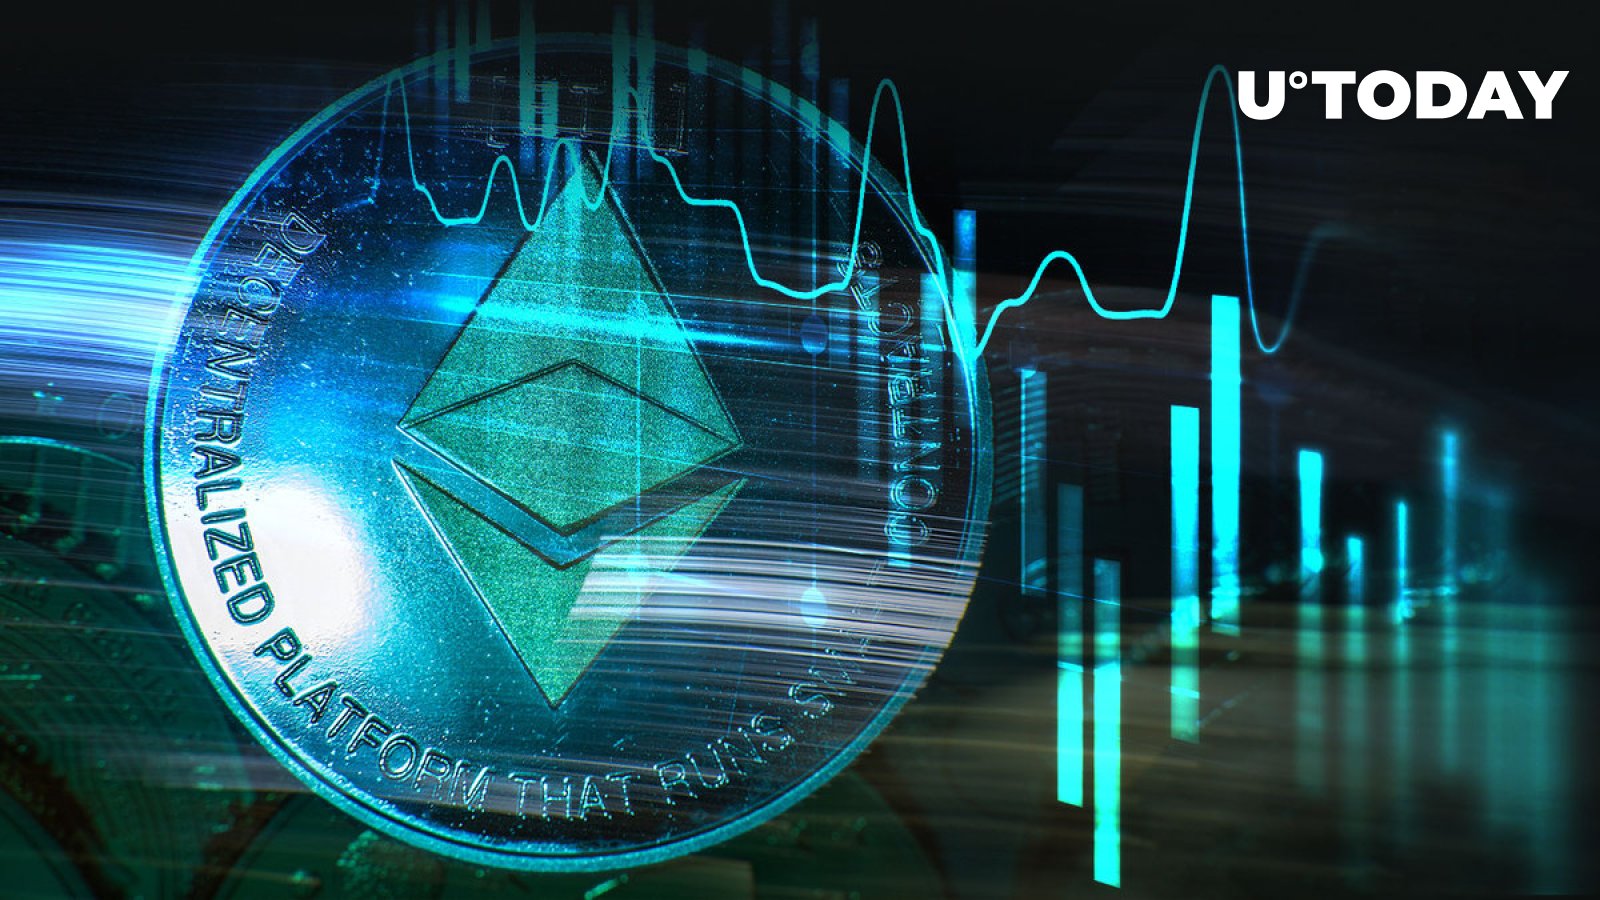 Ethereum Offshoot Coin ETHW Plunges 60% Since Start of Trading: Details